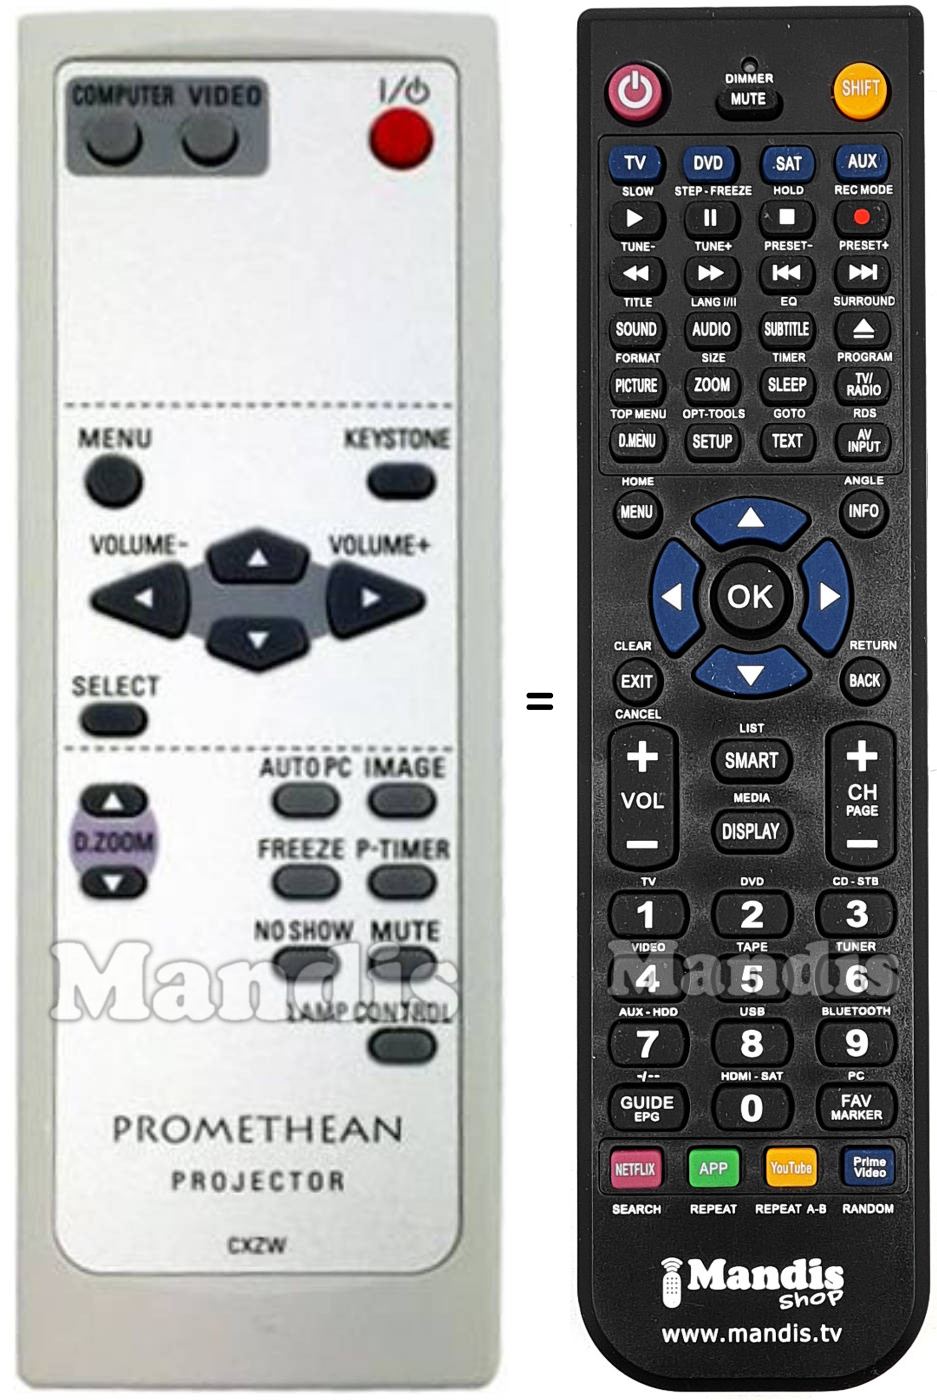 Replacement remote control CXZW ( PROJECTOR )